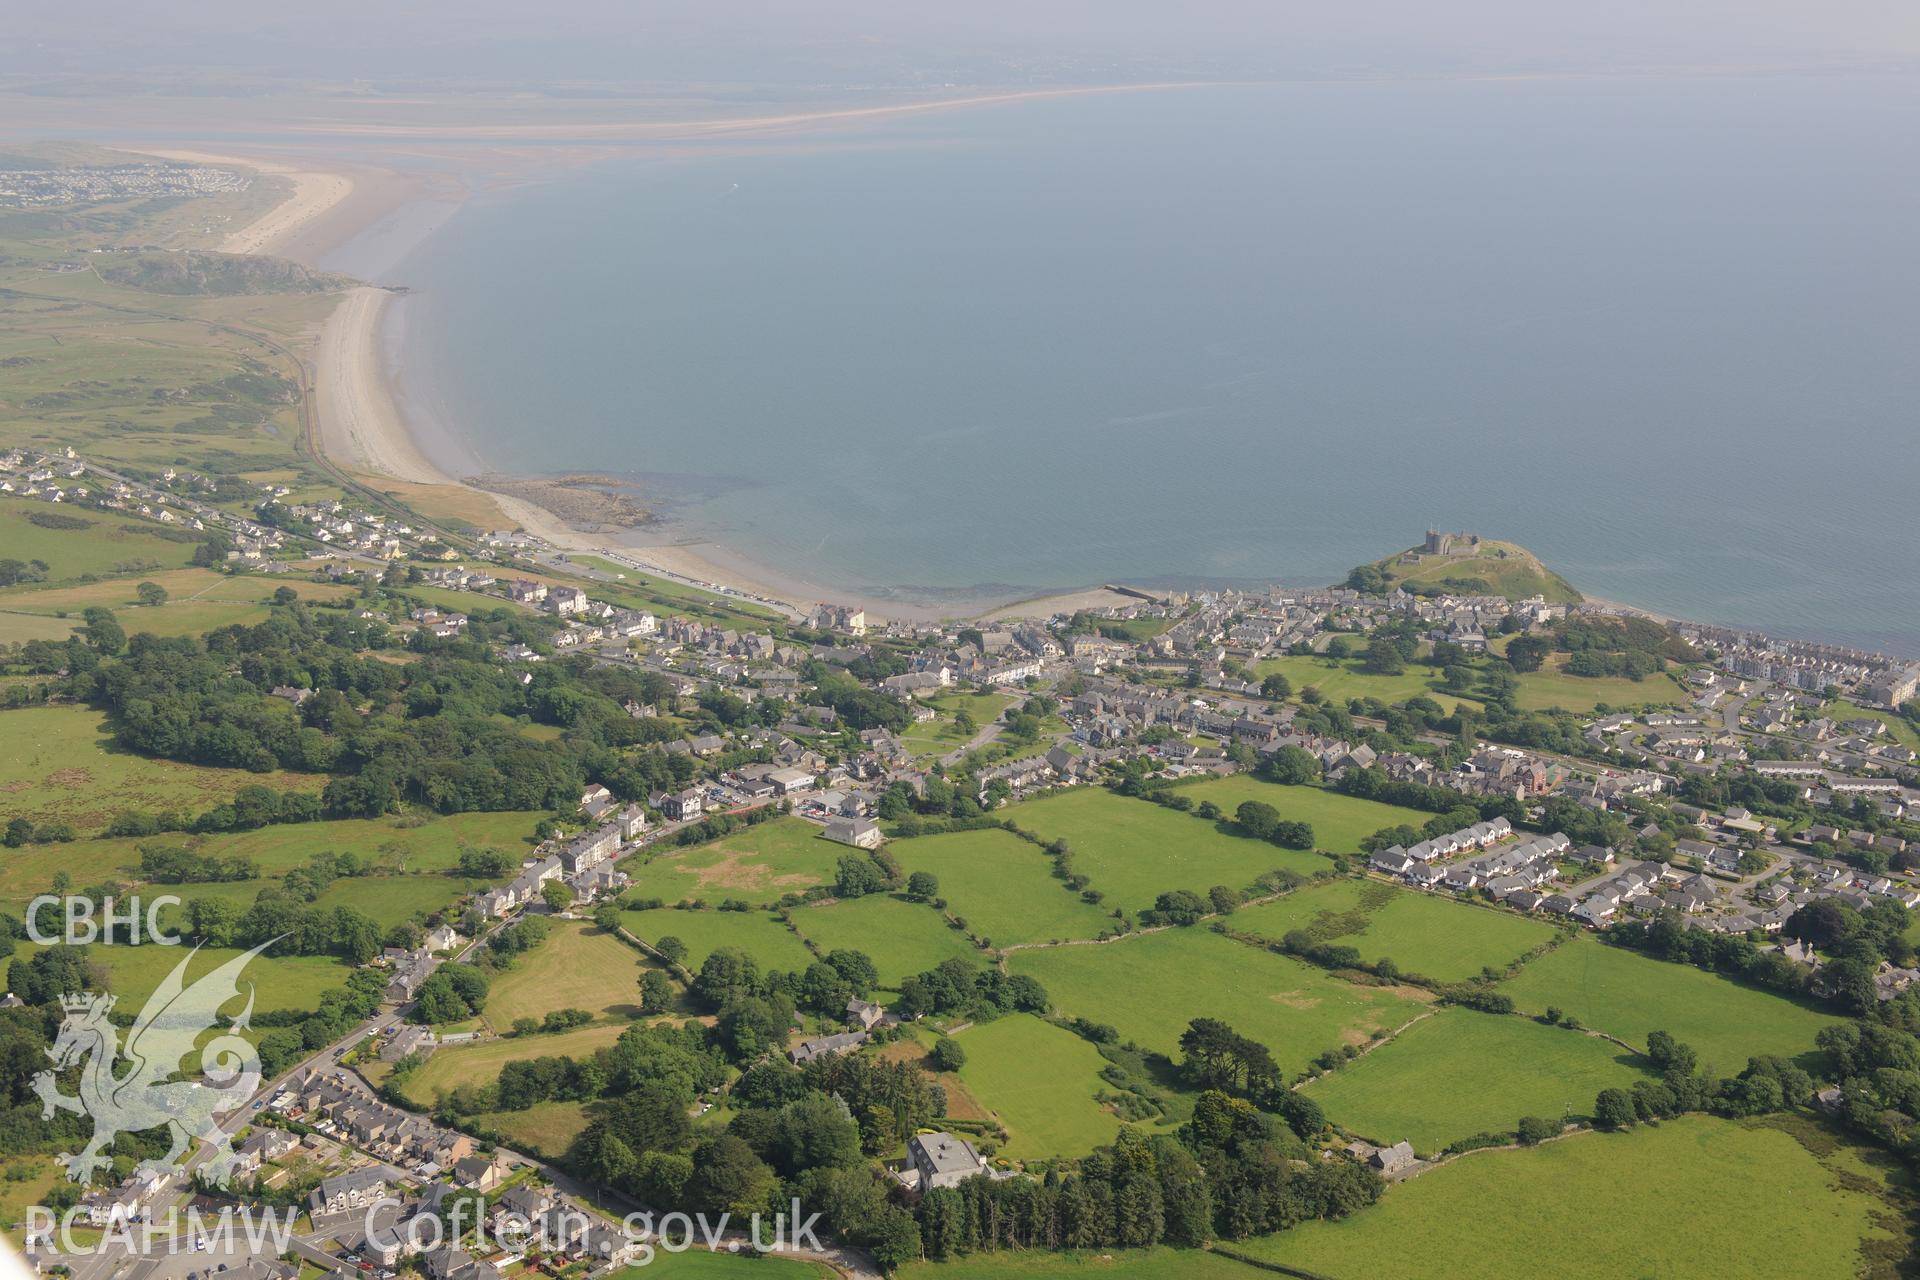 Brynawelon House, with Criccieth Castle overlooking the town of Criccieth. Oblique aerial photograph taken during the Royal Commission?s programme of archaeological aerial reconnaissance by Toby Driver on 12th July 2013.